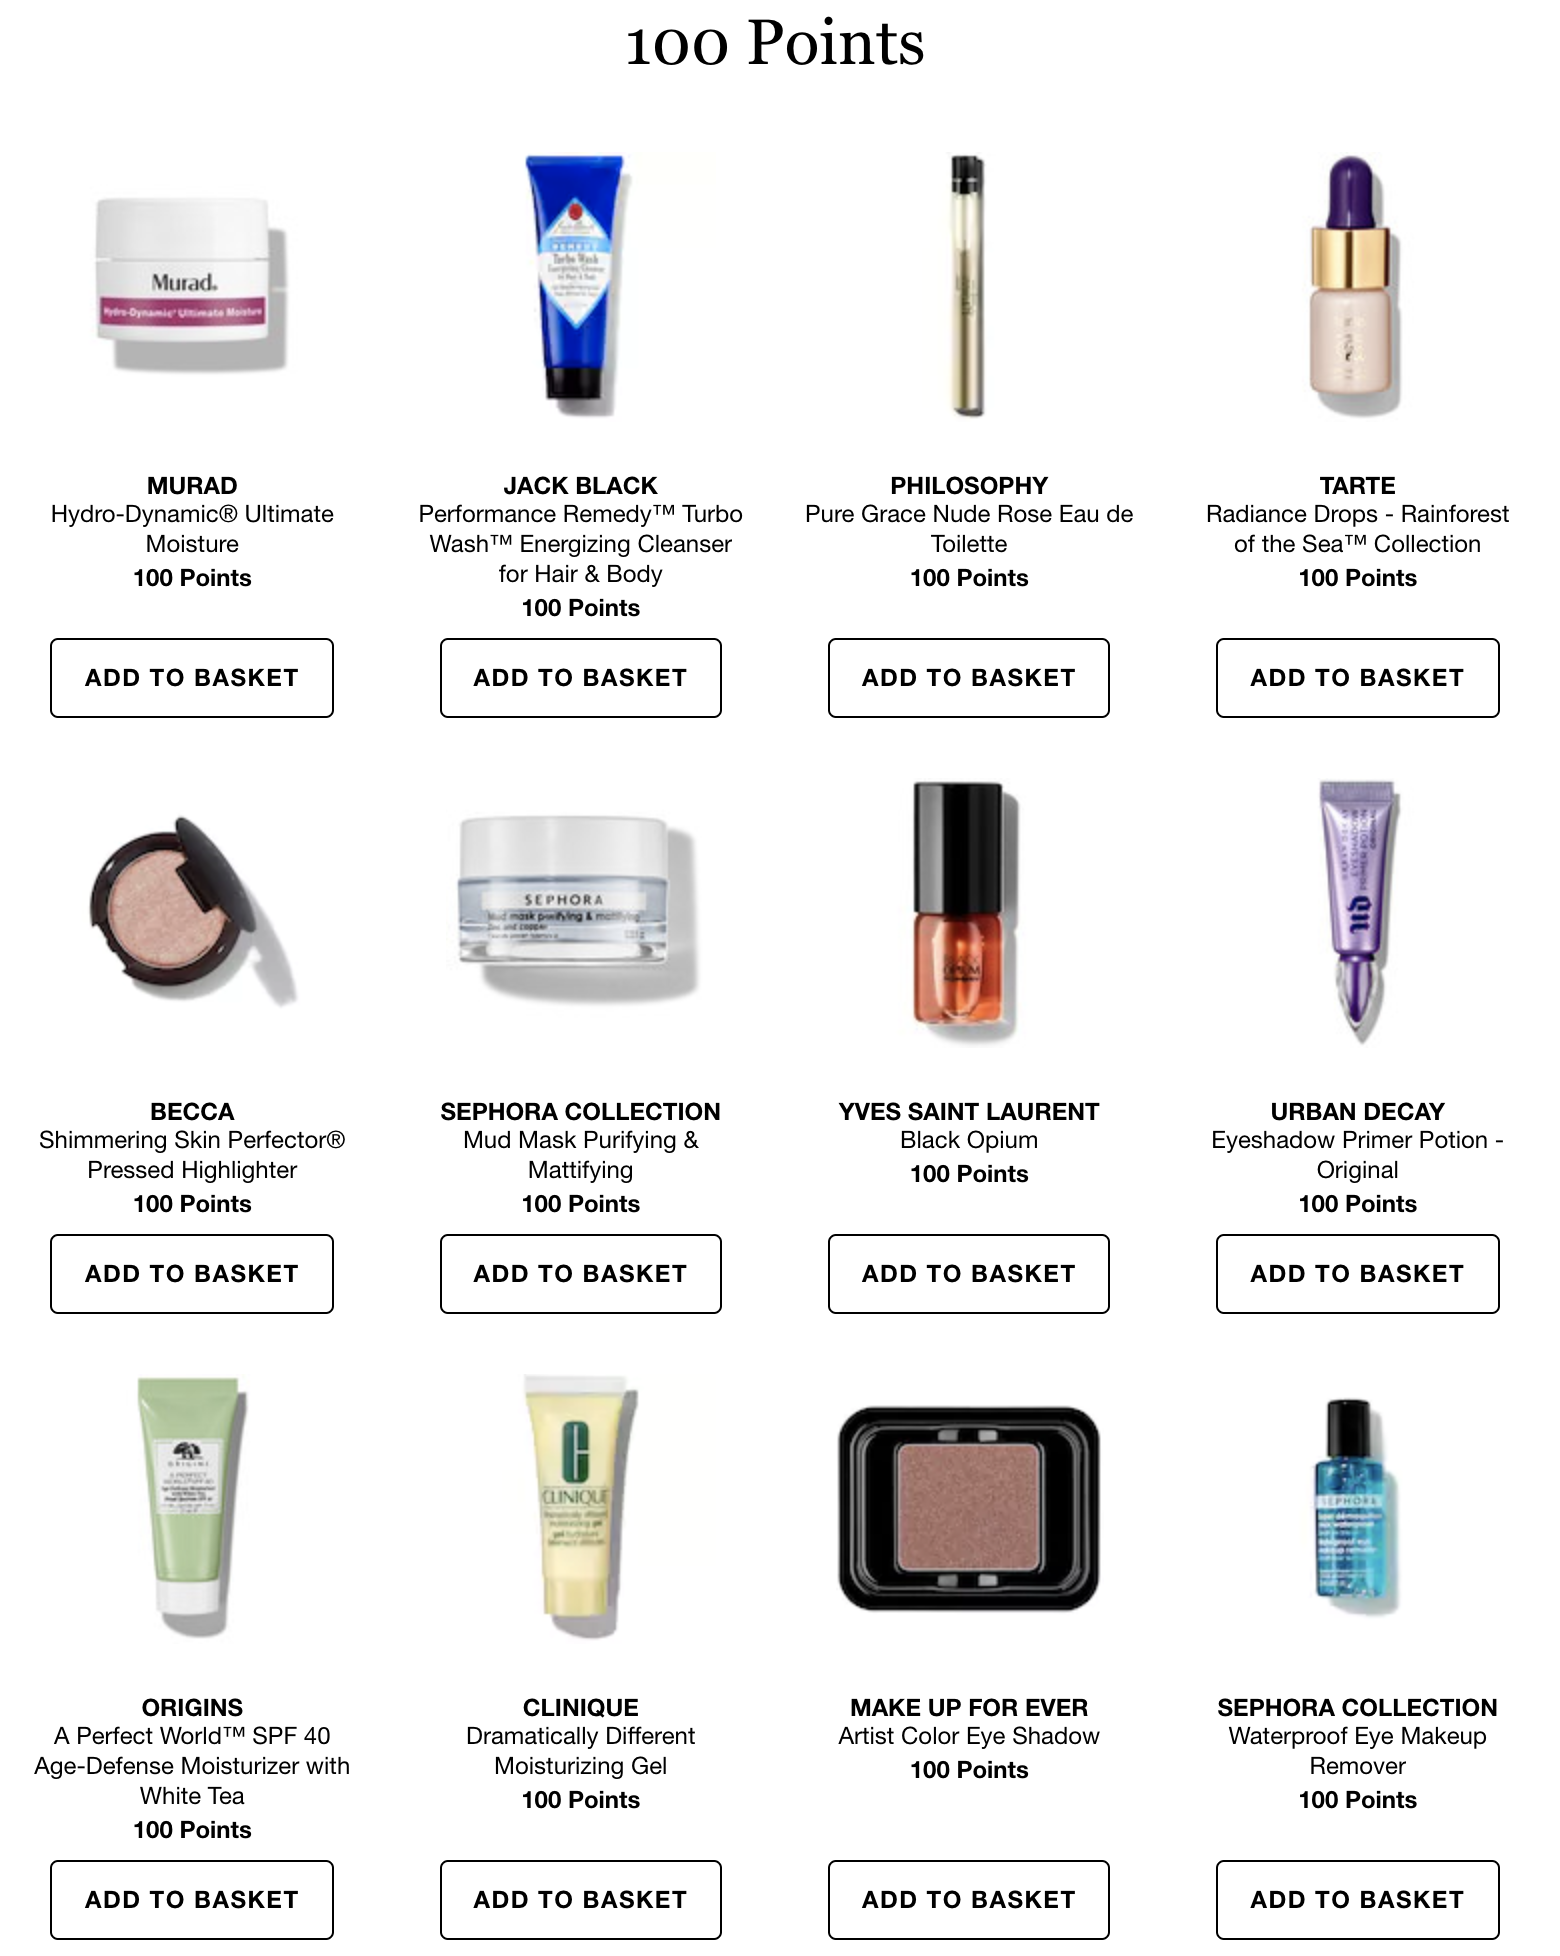 sephora-new-100-points-rewards-gift-with-purchase